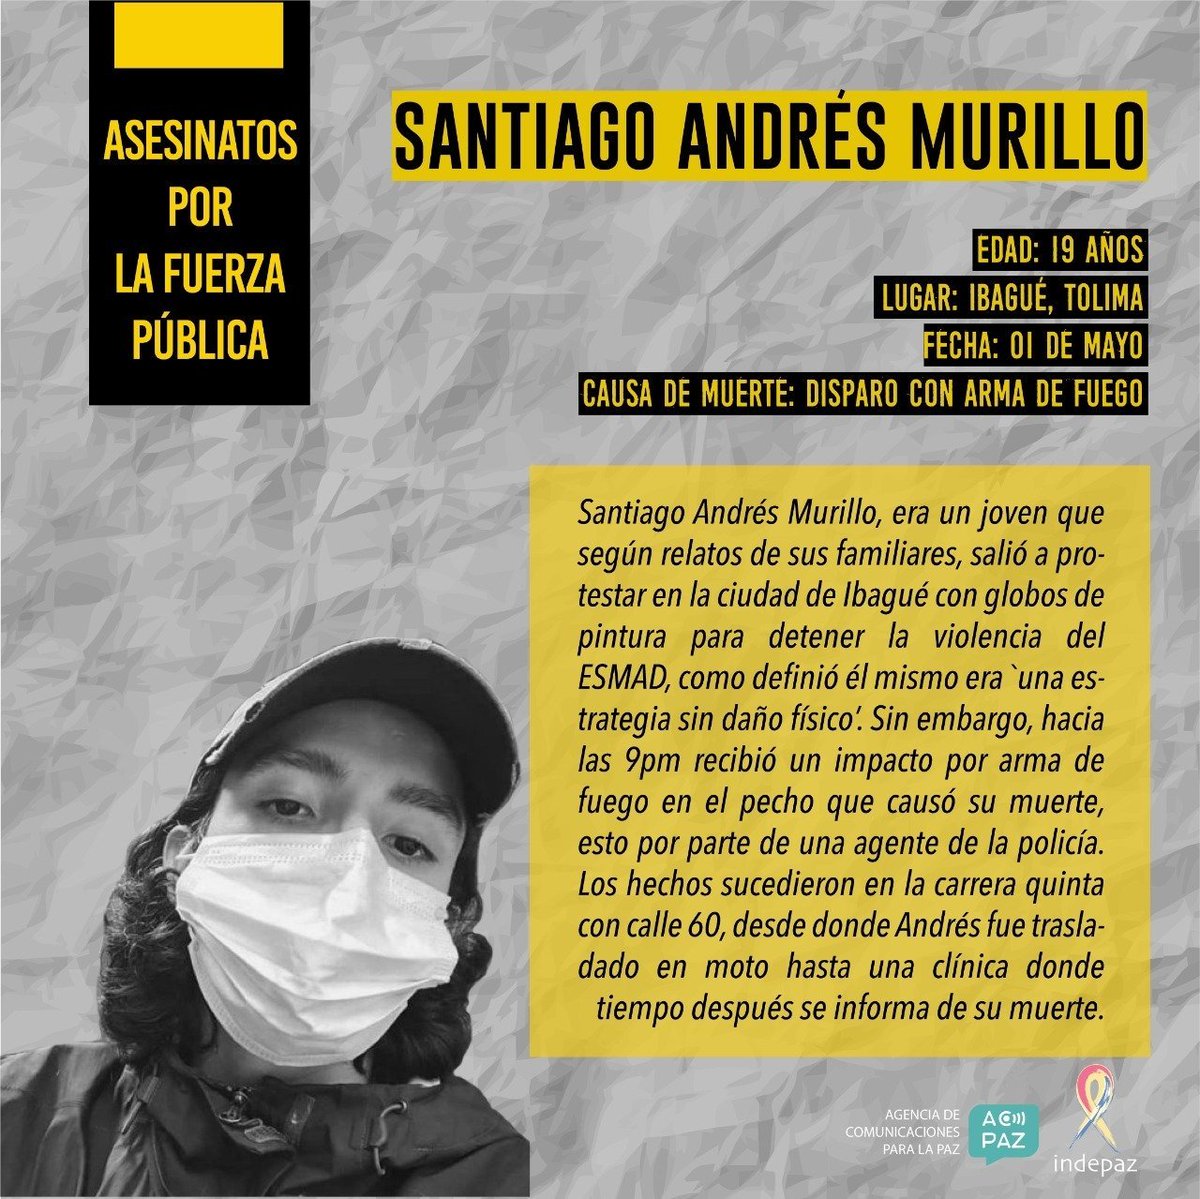 That was the mother of Santiago. He was killed while trying to stop the ESMAD with paint balloons, described as a defensive tactic to make them back up. As Santiago, there are +30 more assassinated on the hands of the State.